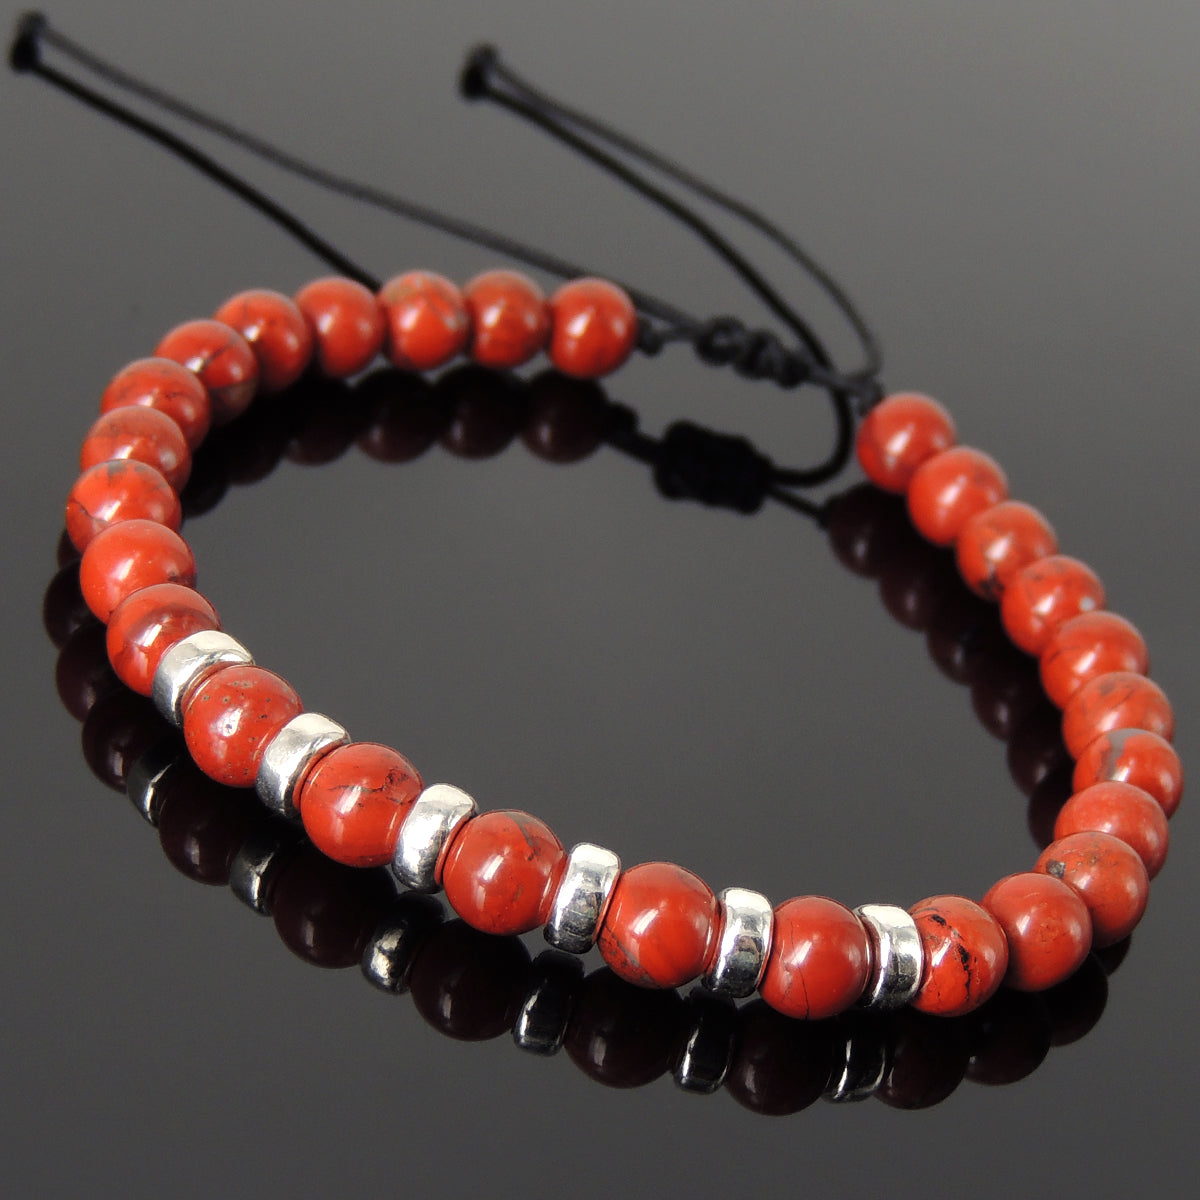 6mm Red Jasper Adjustable Braided Stone Bracelet with S925 Sterling Silver Spacers - Handmade by Gem & Silver BR1164